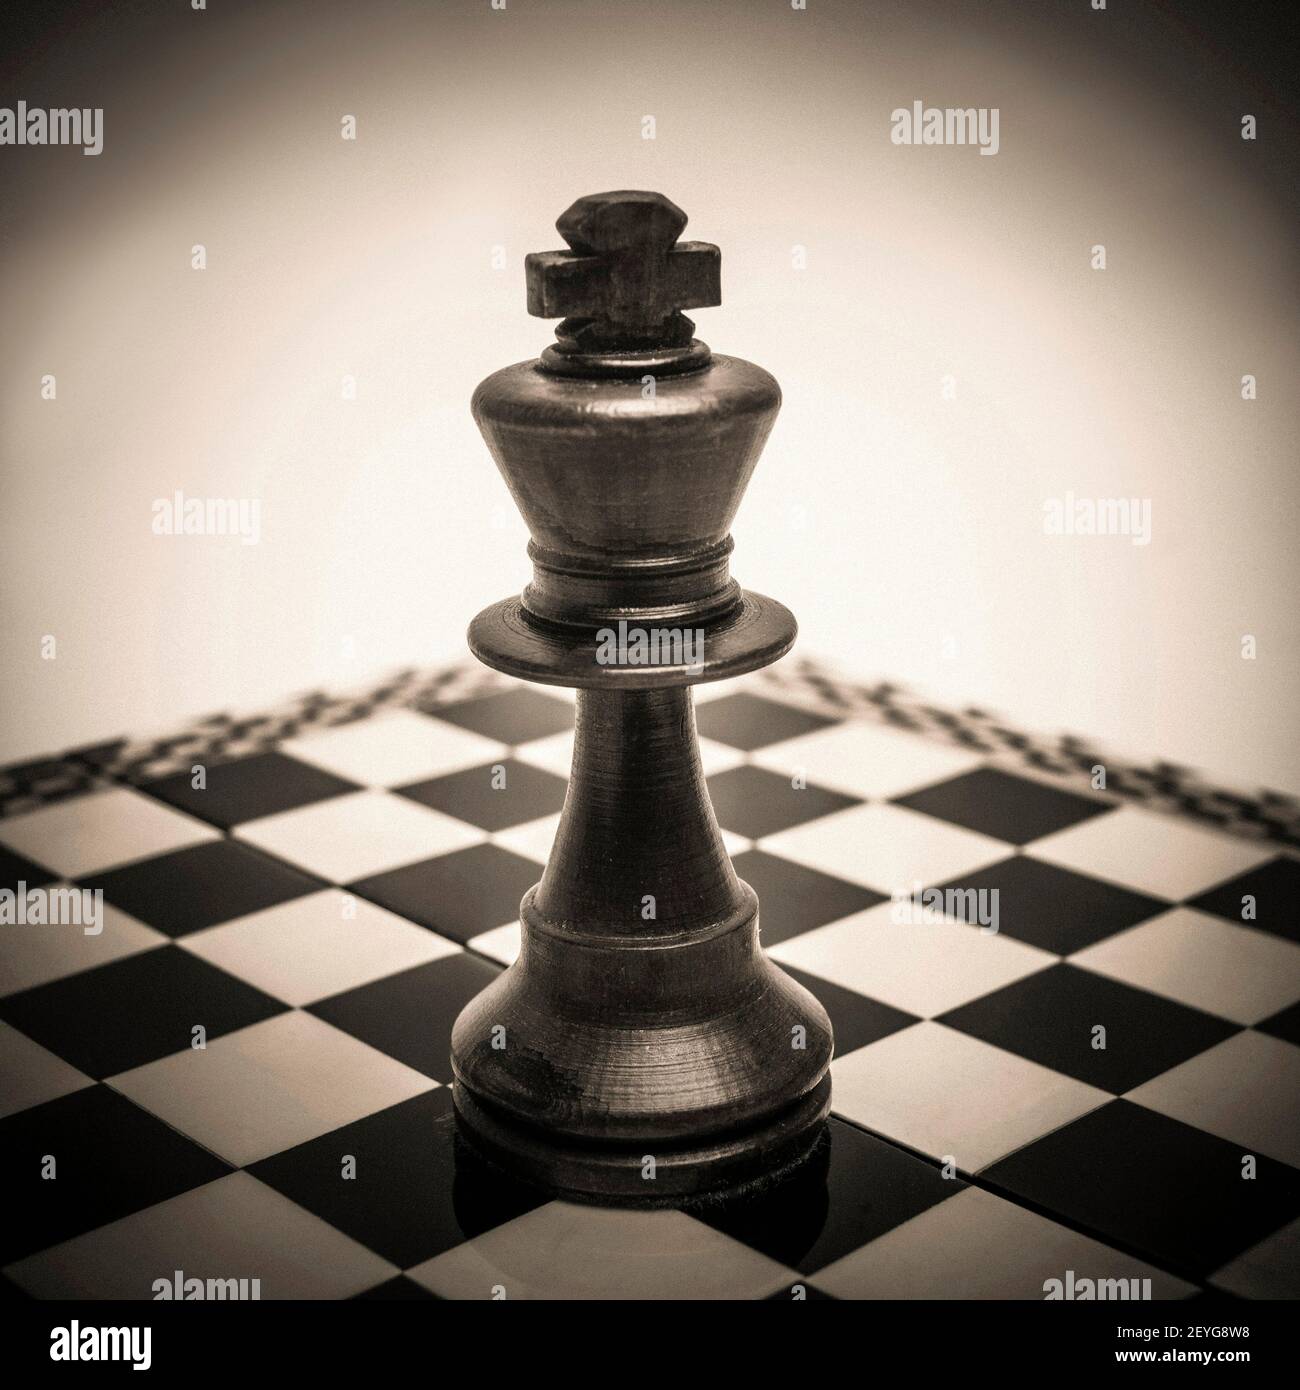 King chess piece on chessboard Stock Photo